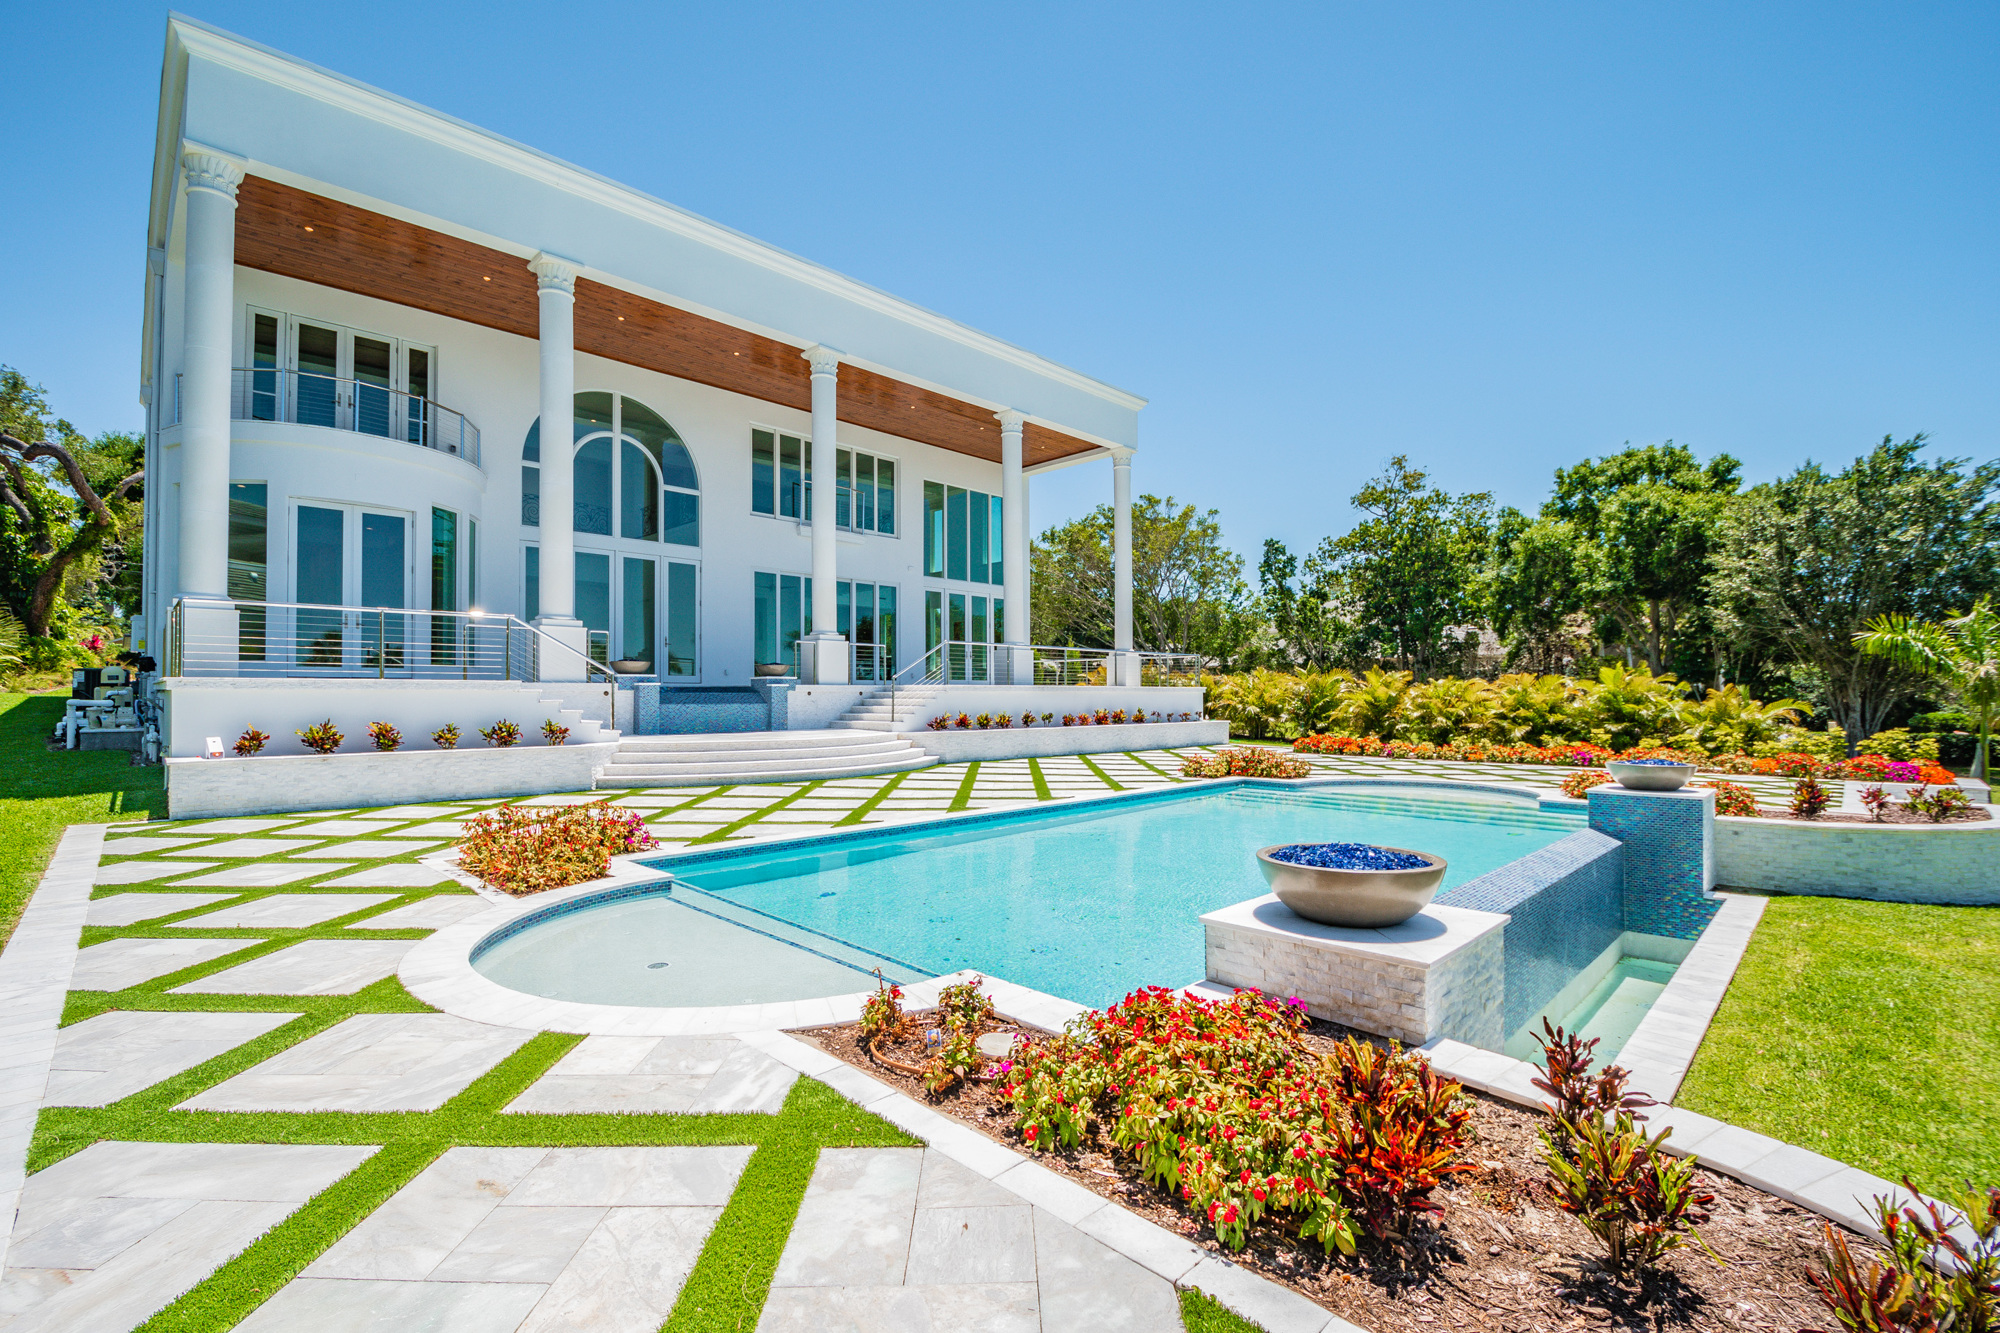 Courtesy. The property at 110 Harbor View Lane in Belleair Bluffs is listed for $4.59 million by The Thorn Collection of Coldwell Banker Realty.